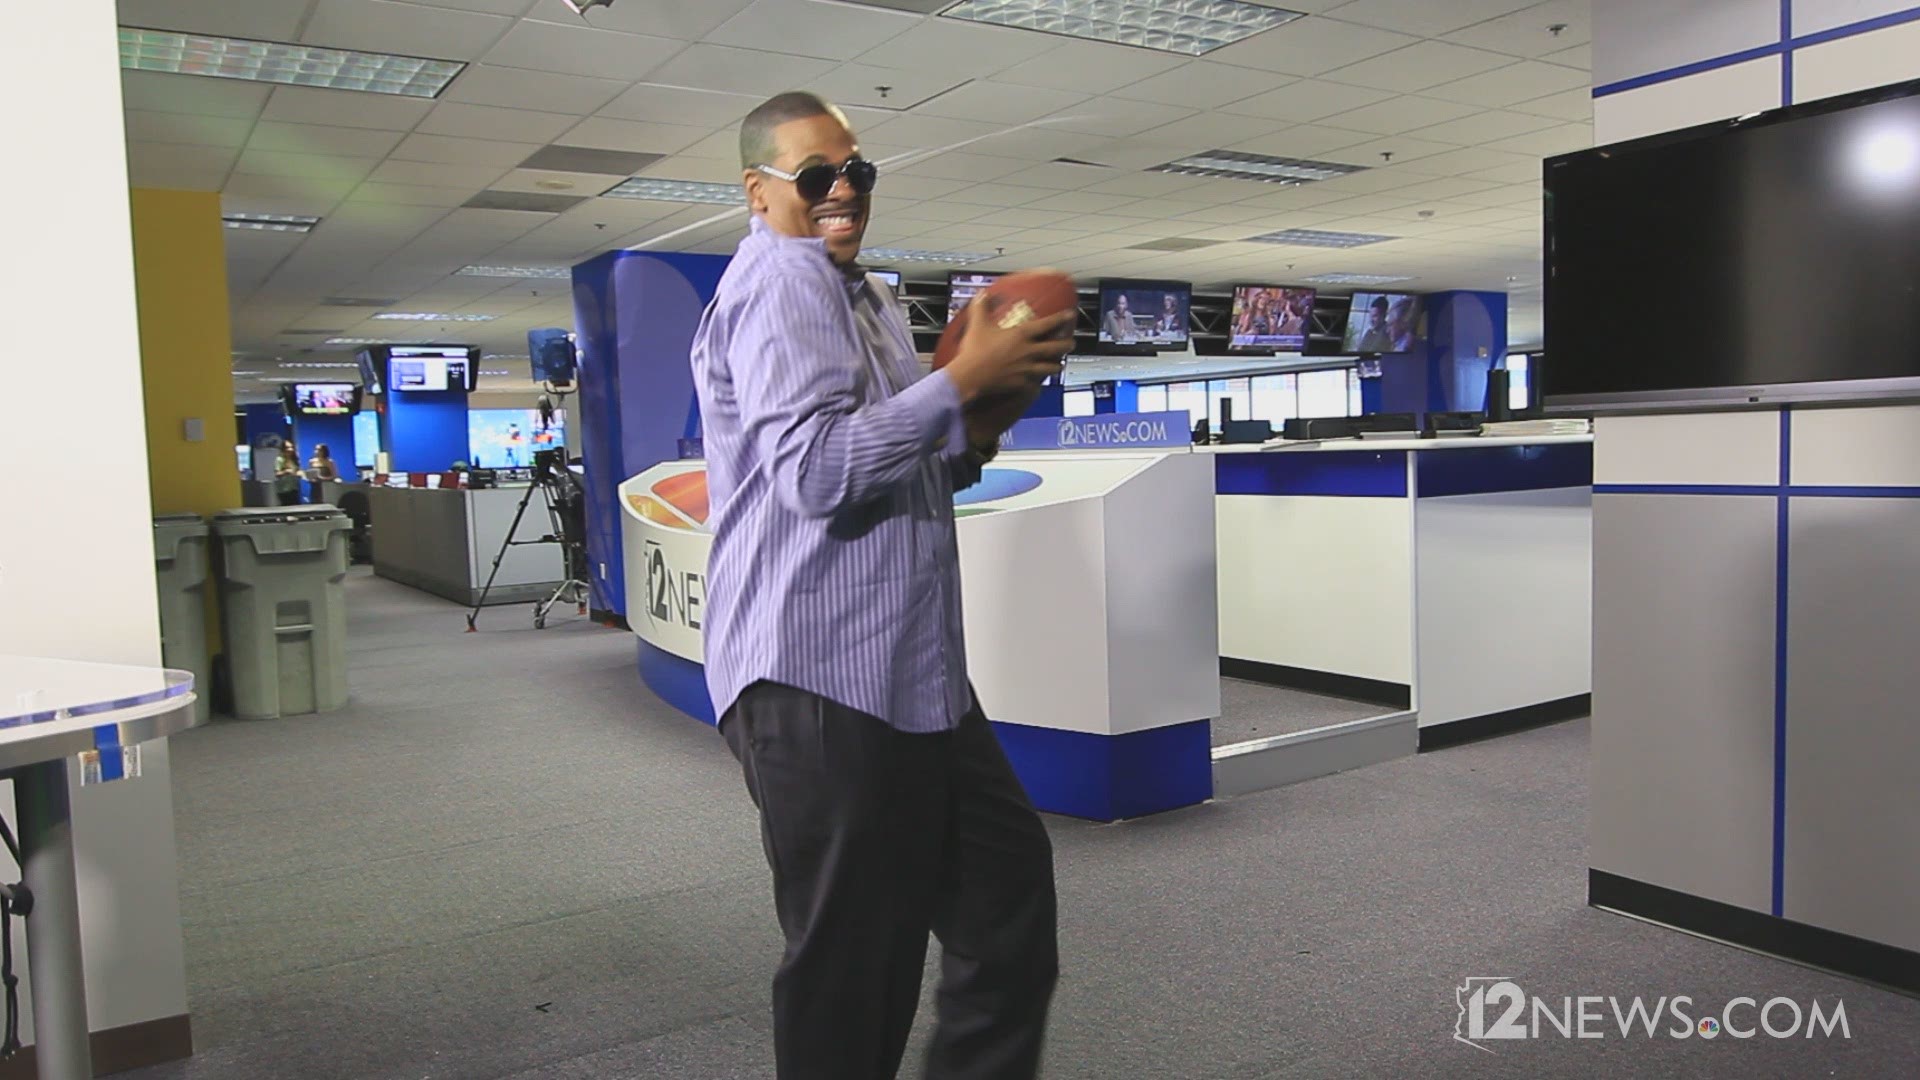 12 News talent show off their moves